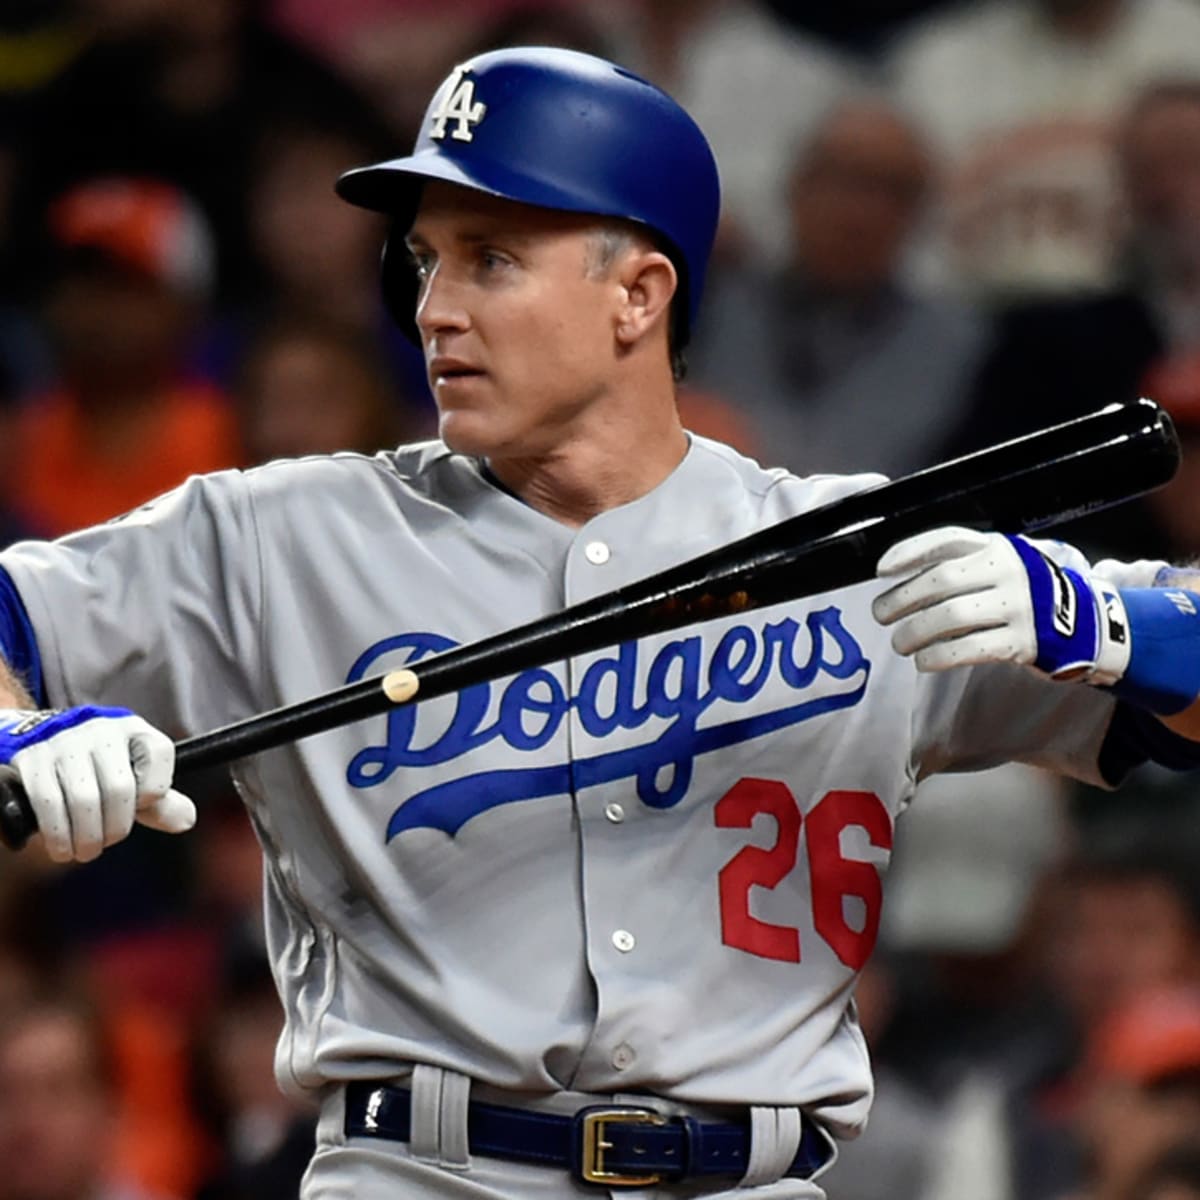 Chase Utley, Dodgers' second baseman, to retire after 2018 season